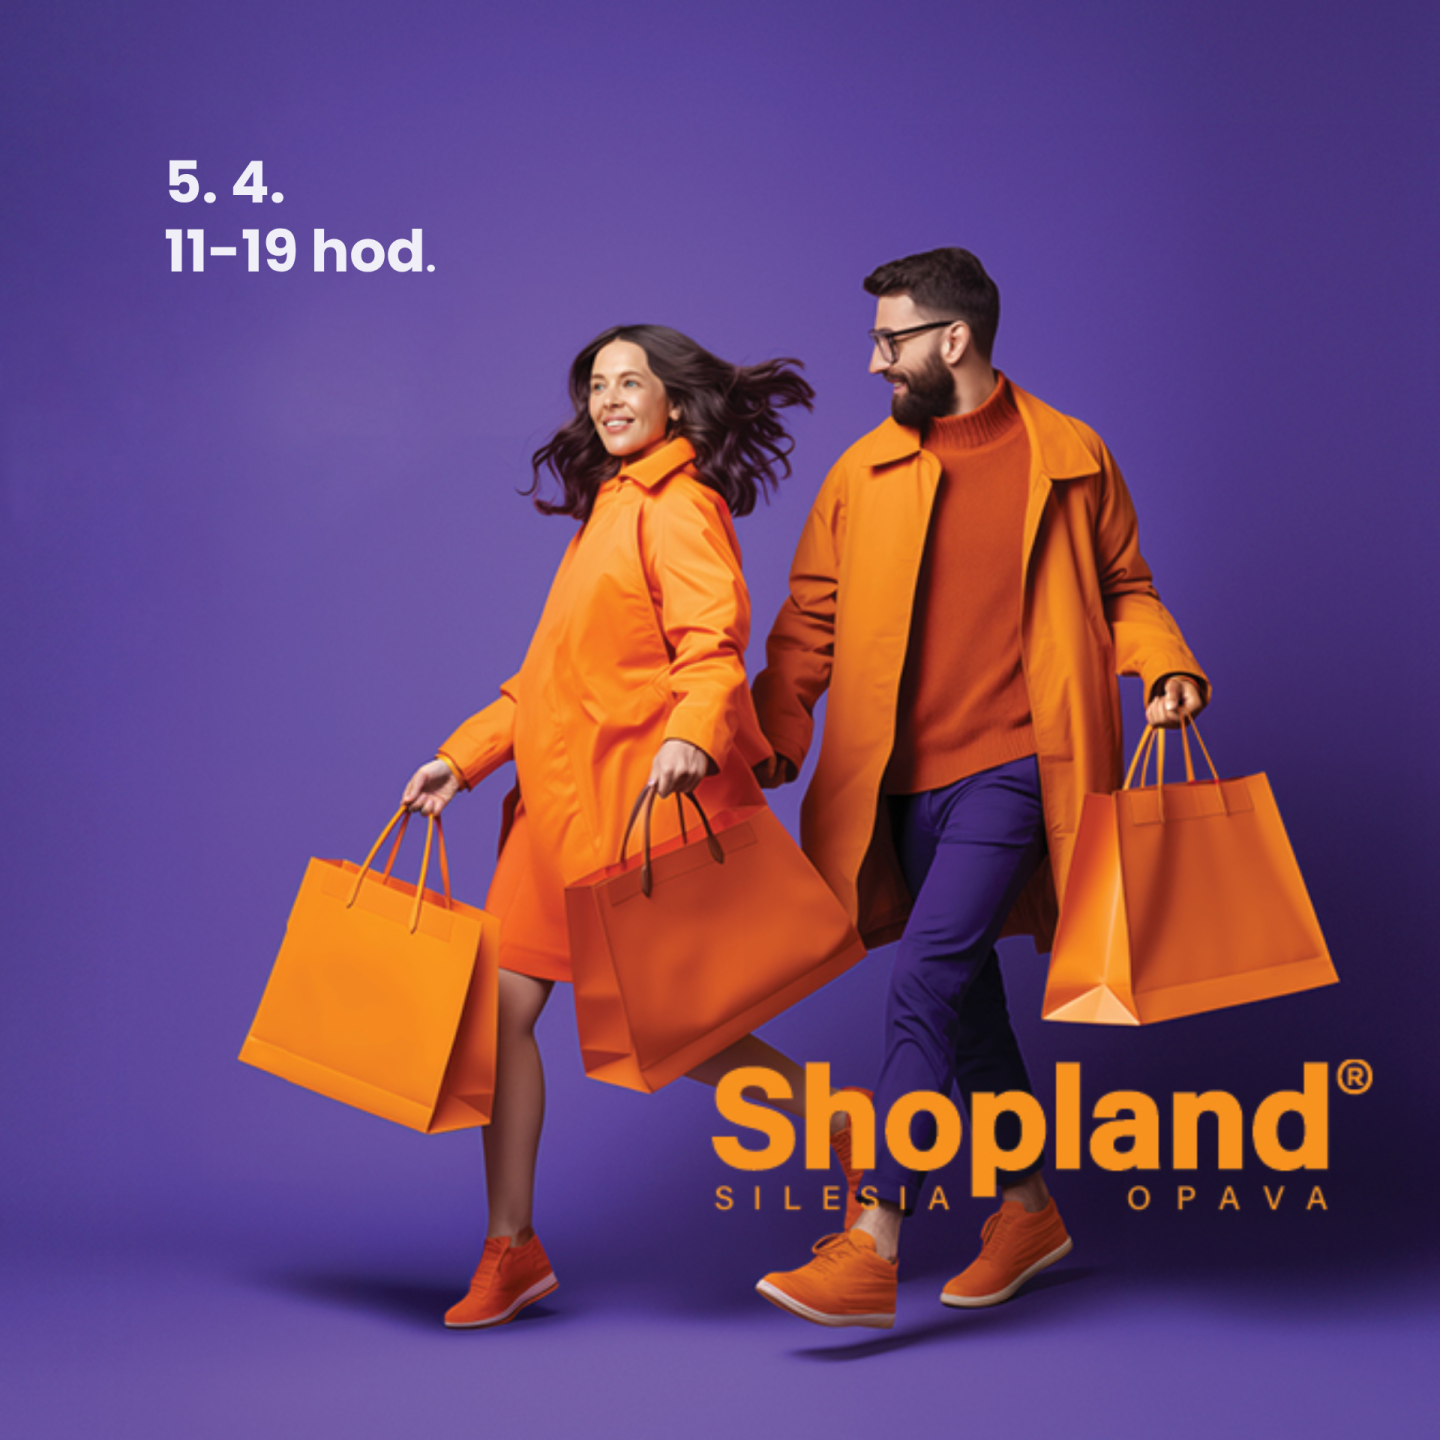 SHOPLAND IS HERE! Already on April 5 with gifts for you!